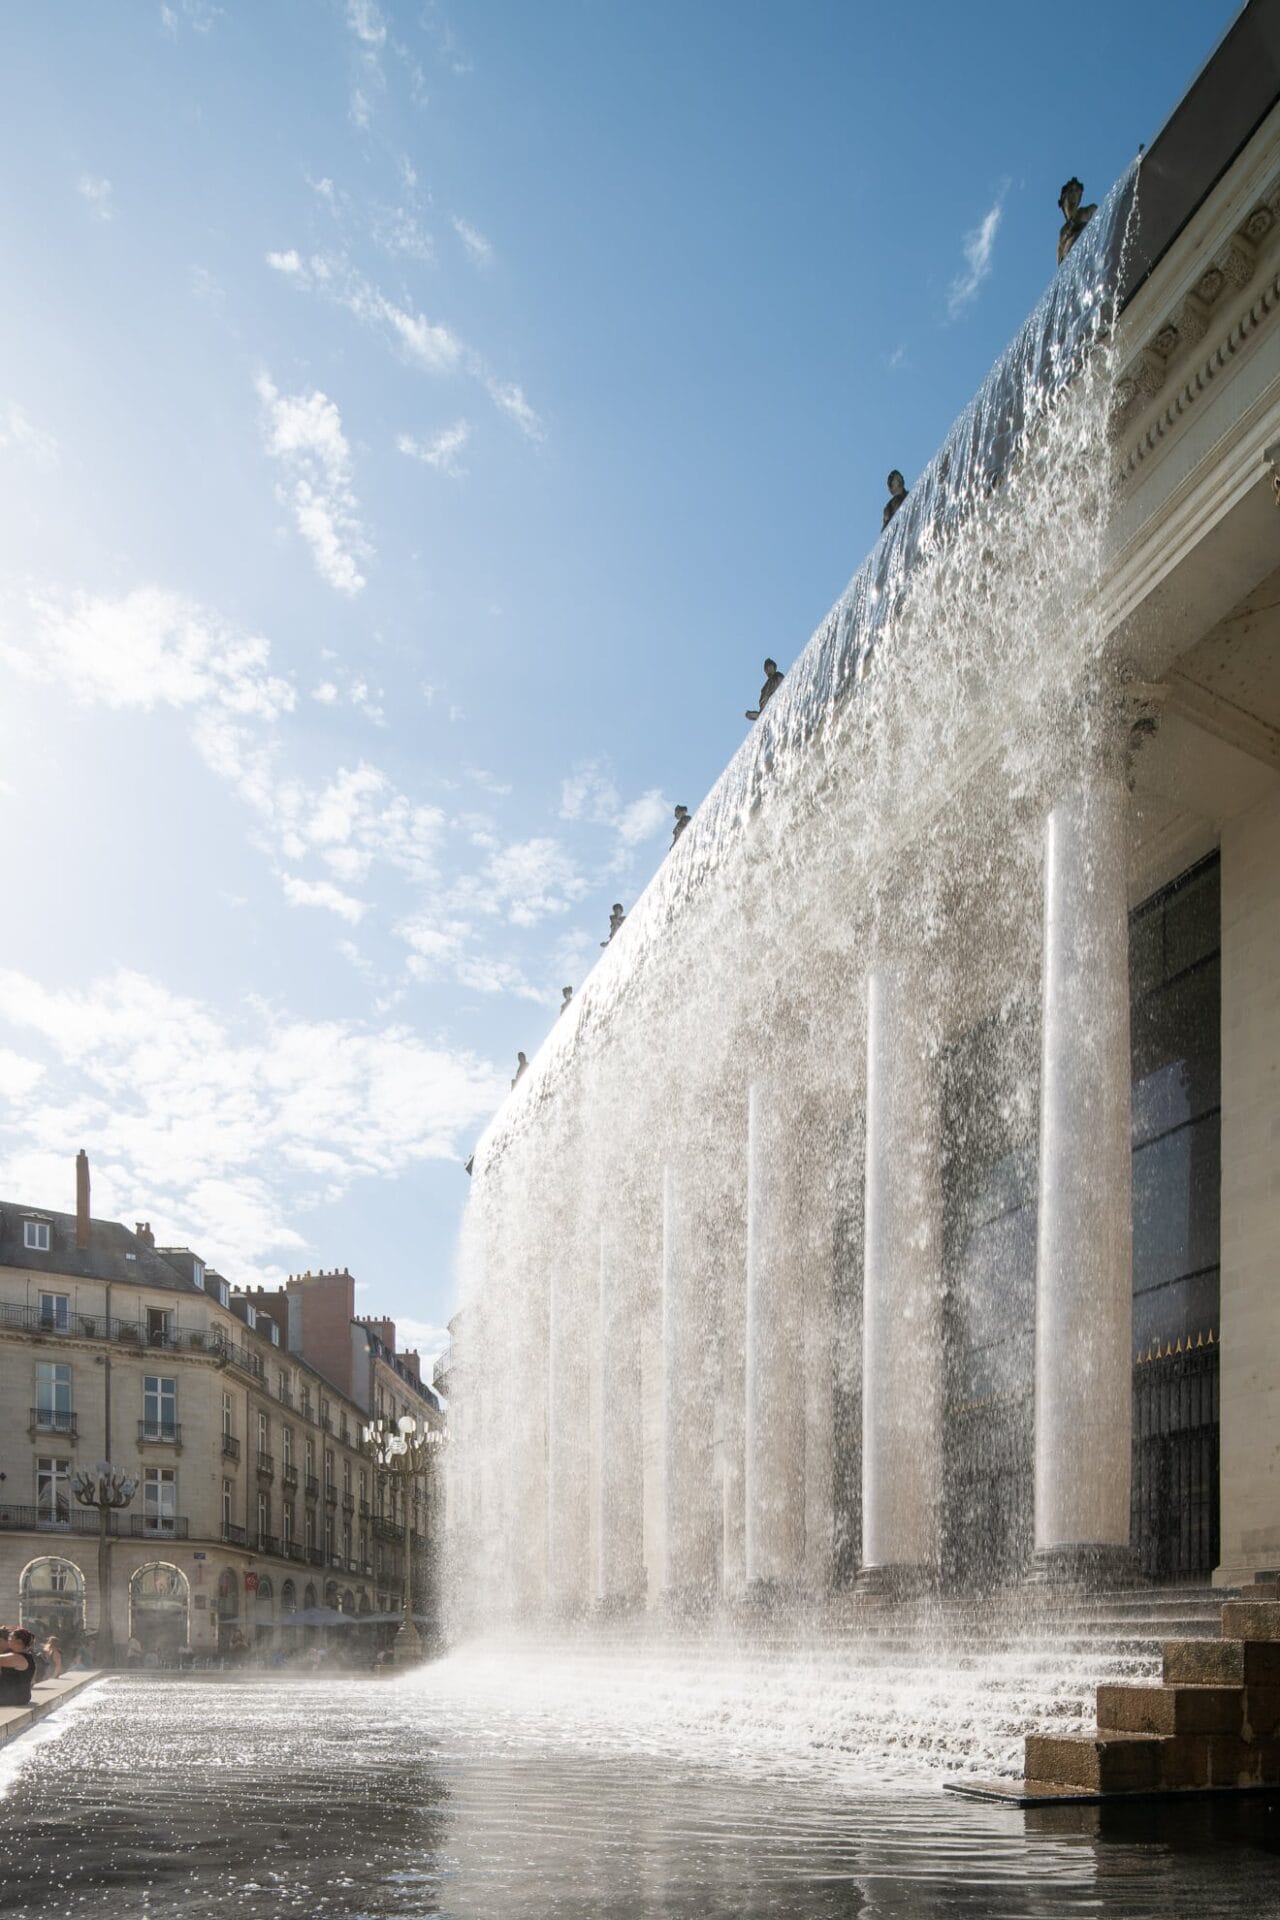 water rains down from a classical style building with columns out front